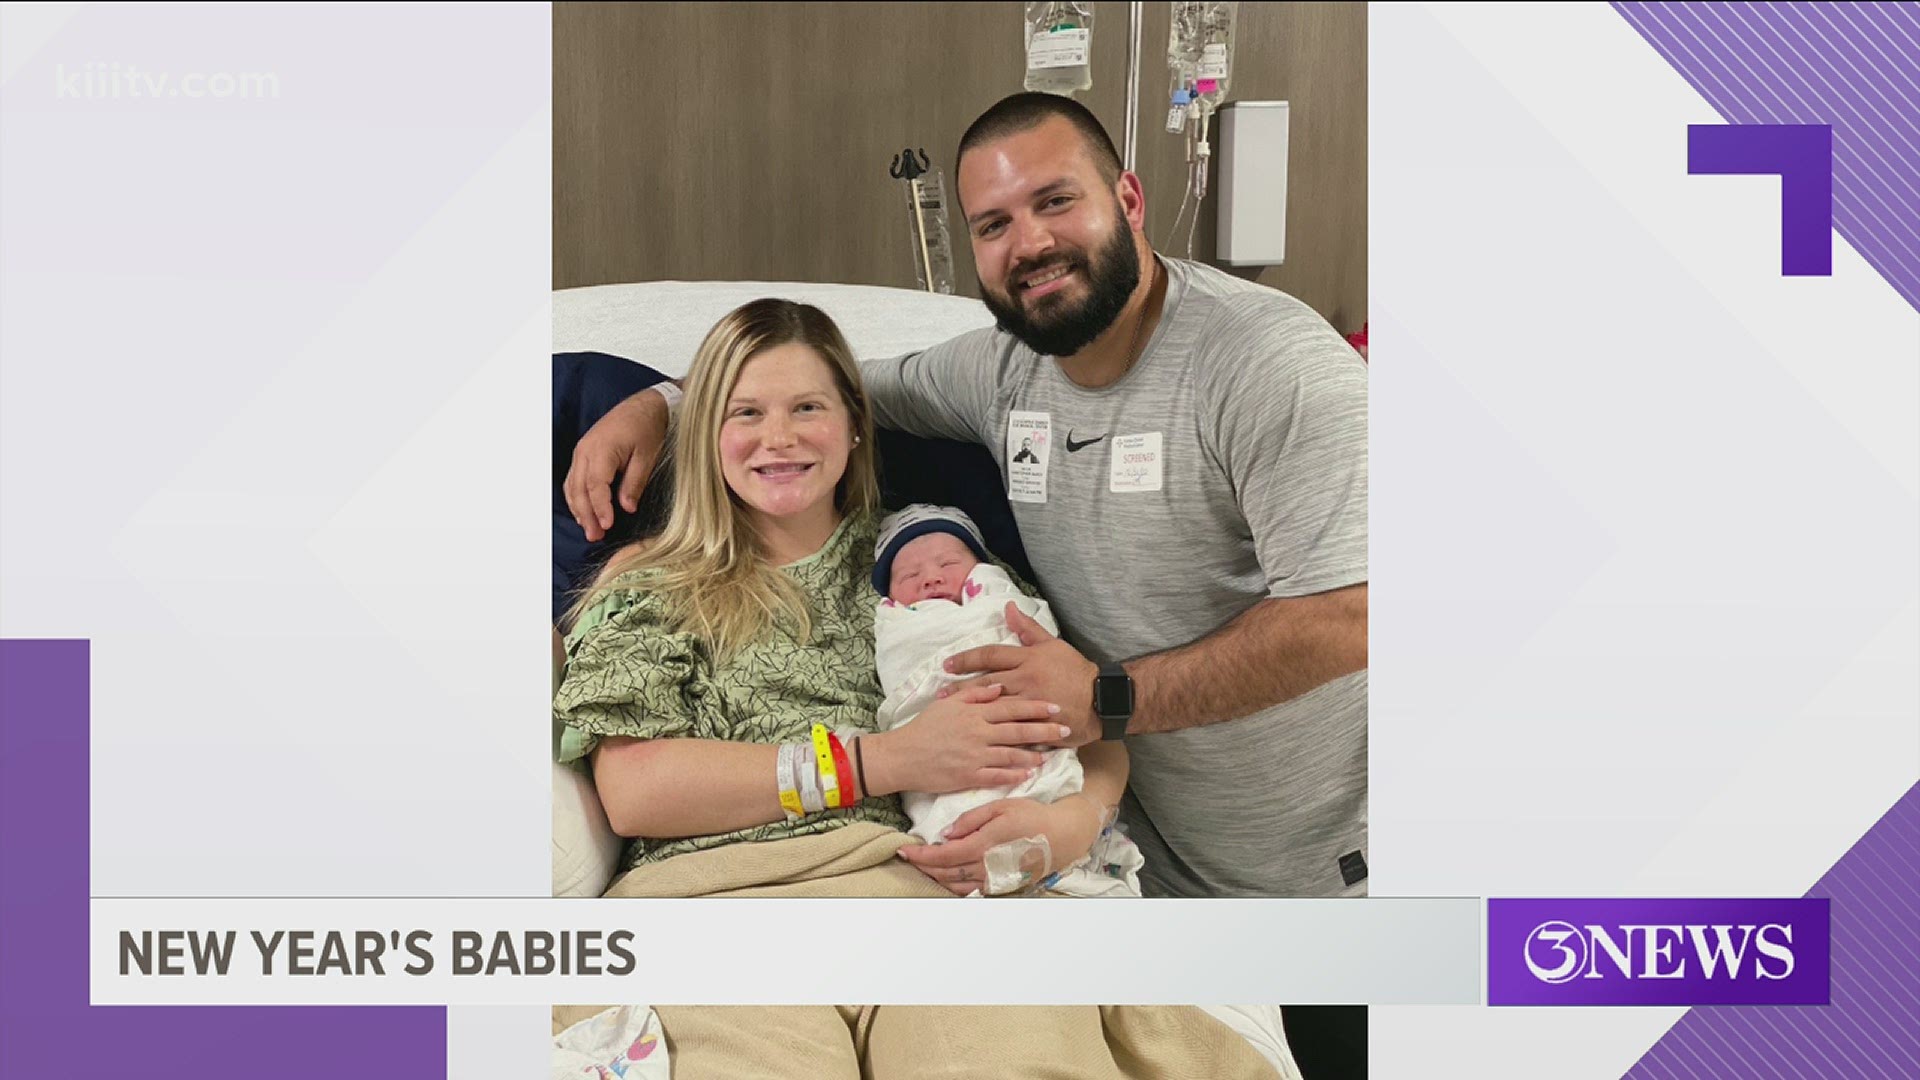 The first baby born in 2021 in the Coastal Bend came into the world at 1:28 a.m. at the Corpus Christi Medical Center.